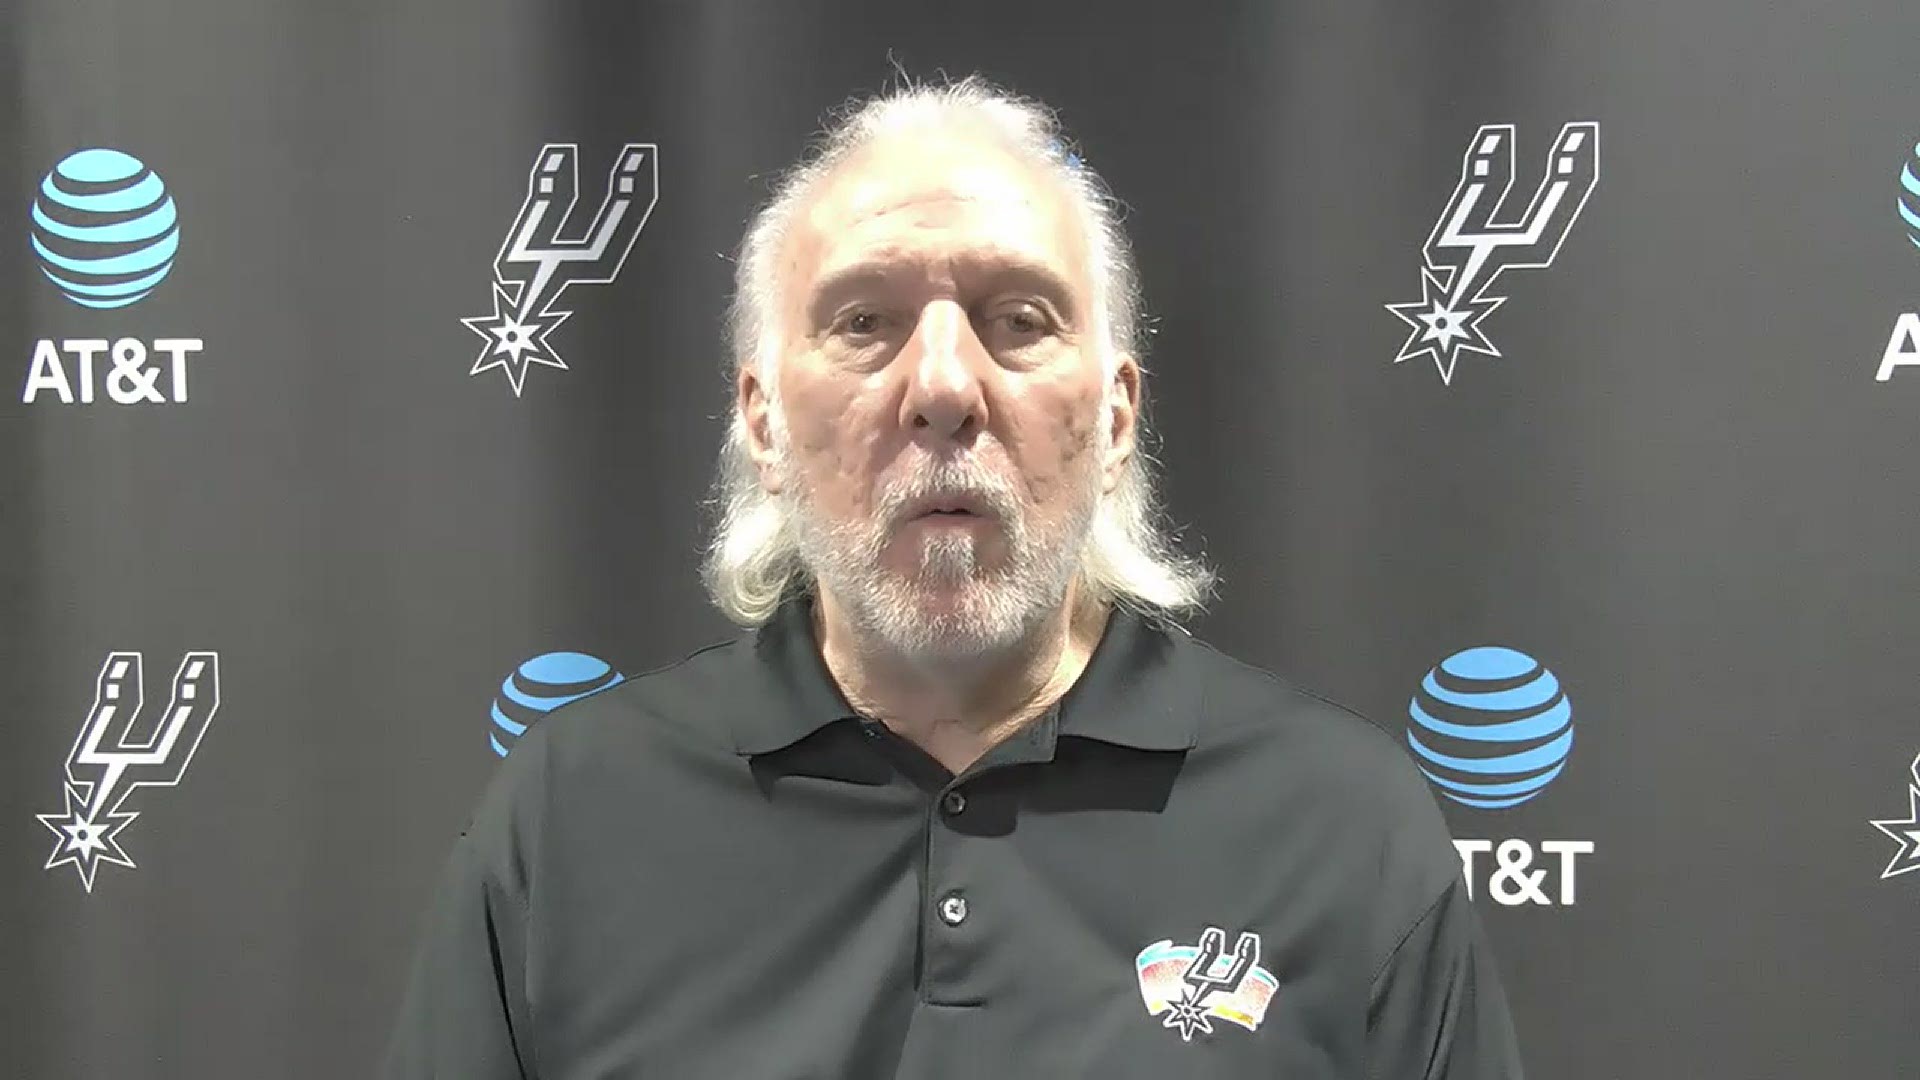 Pop said that his team didn't play that well, got beaten in a number of areas, but maintained good effort throughout the contest.